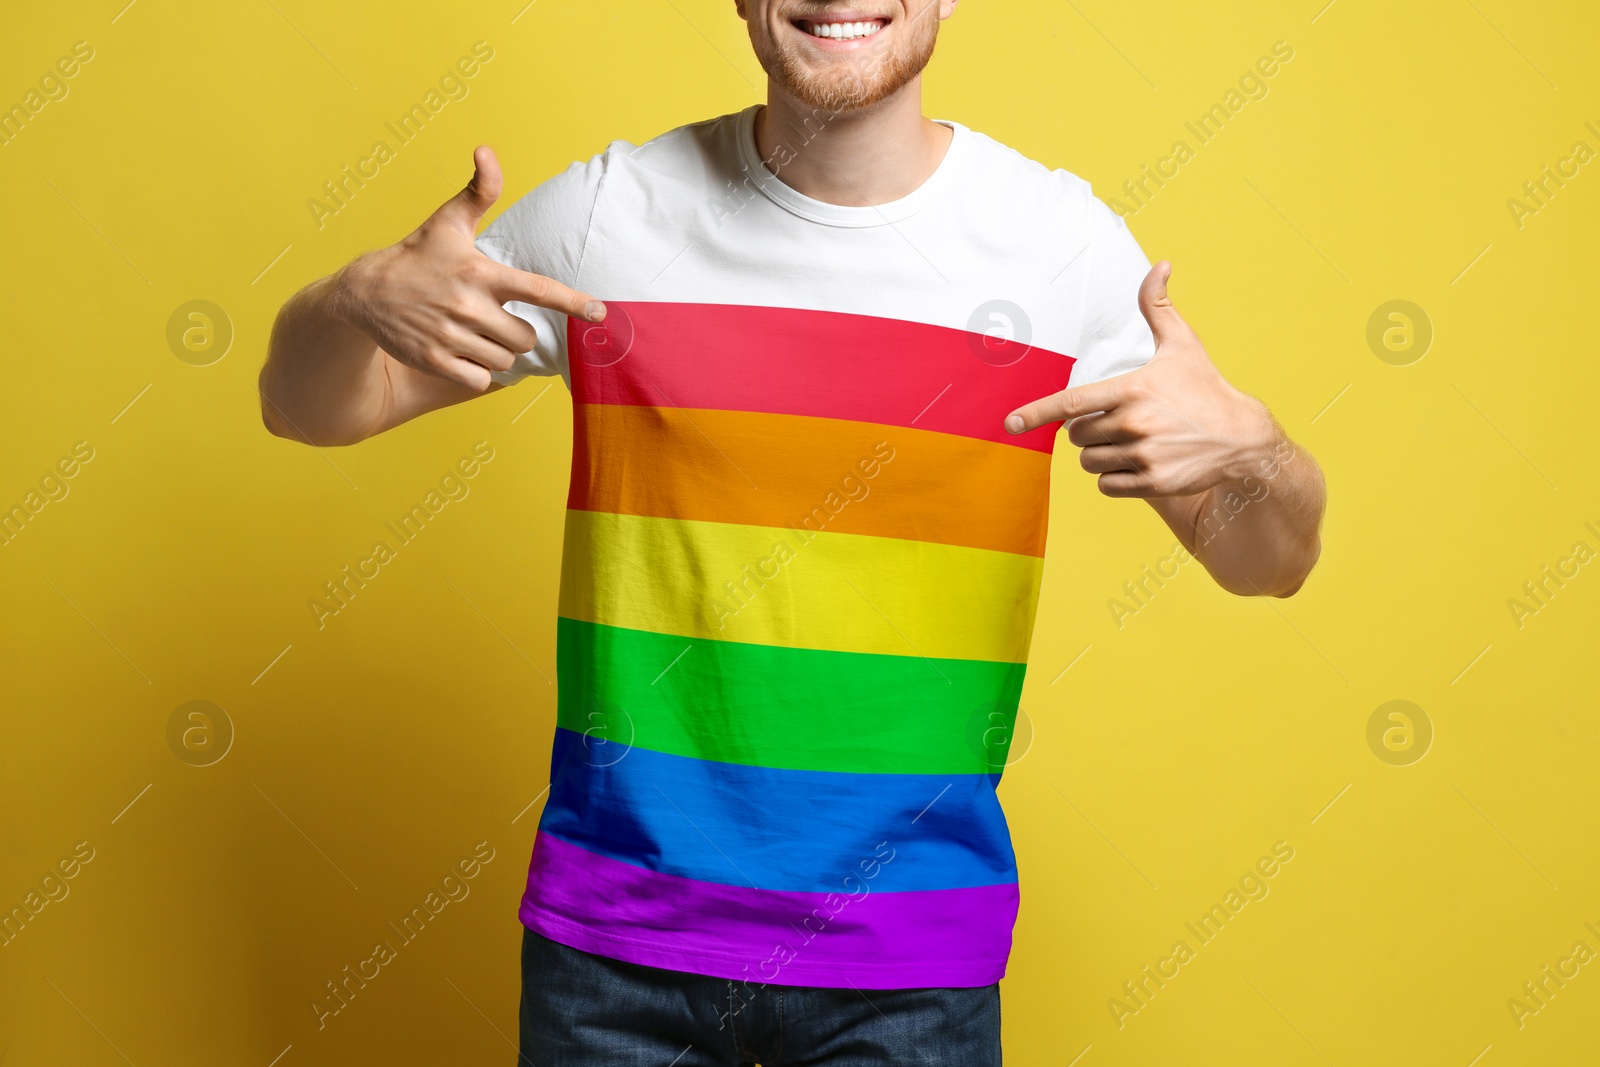 Image of Young man wearing t-shirt with image of LGBT pride flag on yellow background